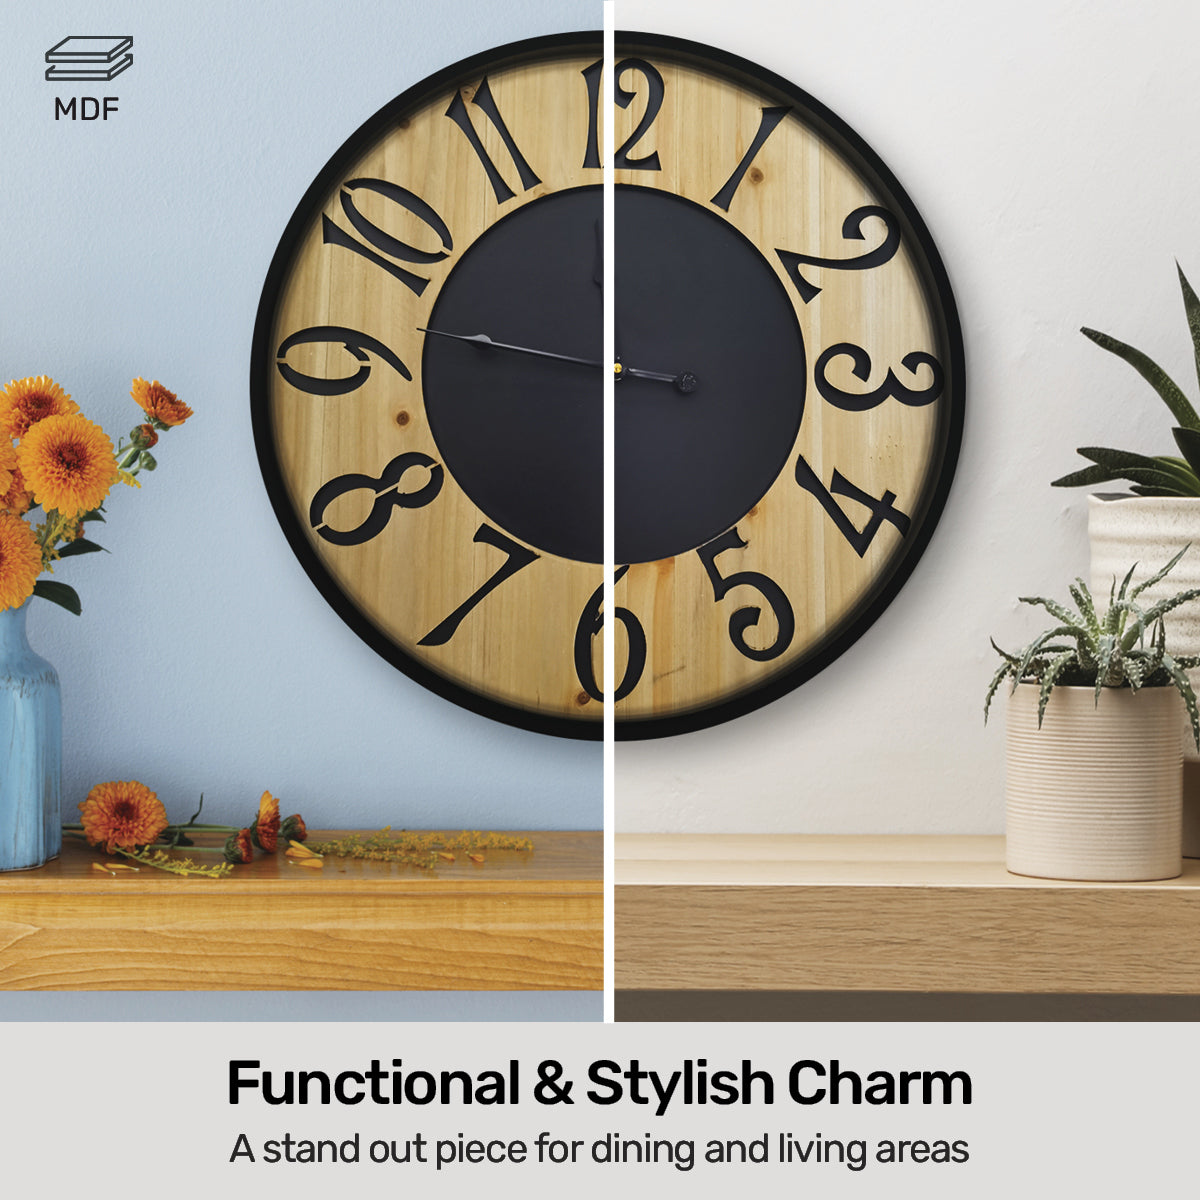 Home Master Wall Clock Wood & Metal Look Stylish Design Large Numbers 60cm Deals499